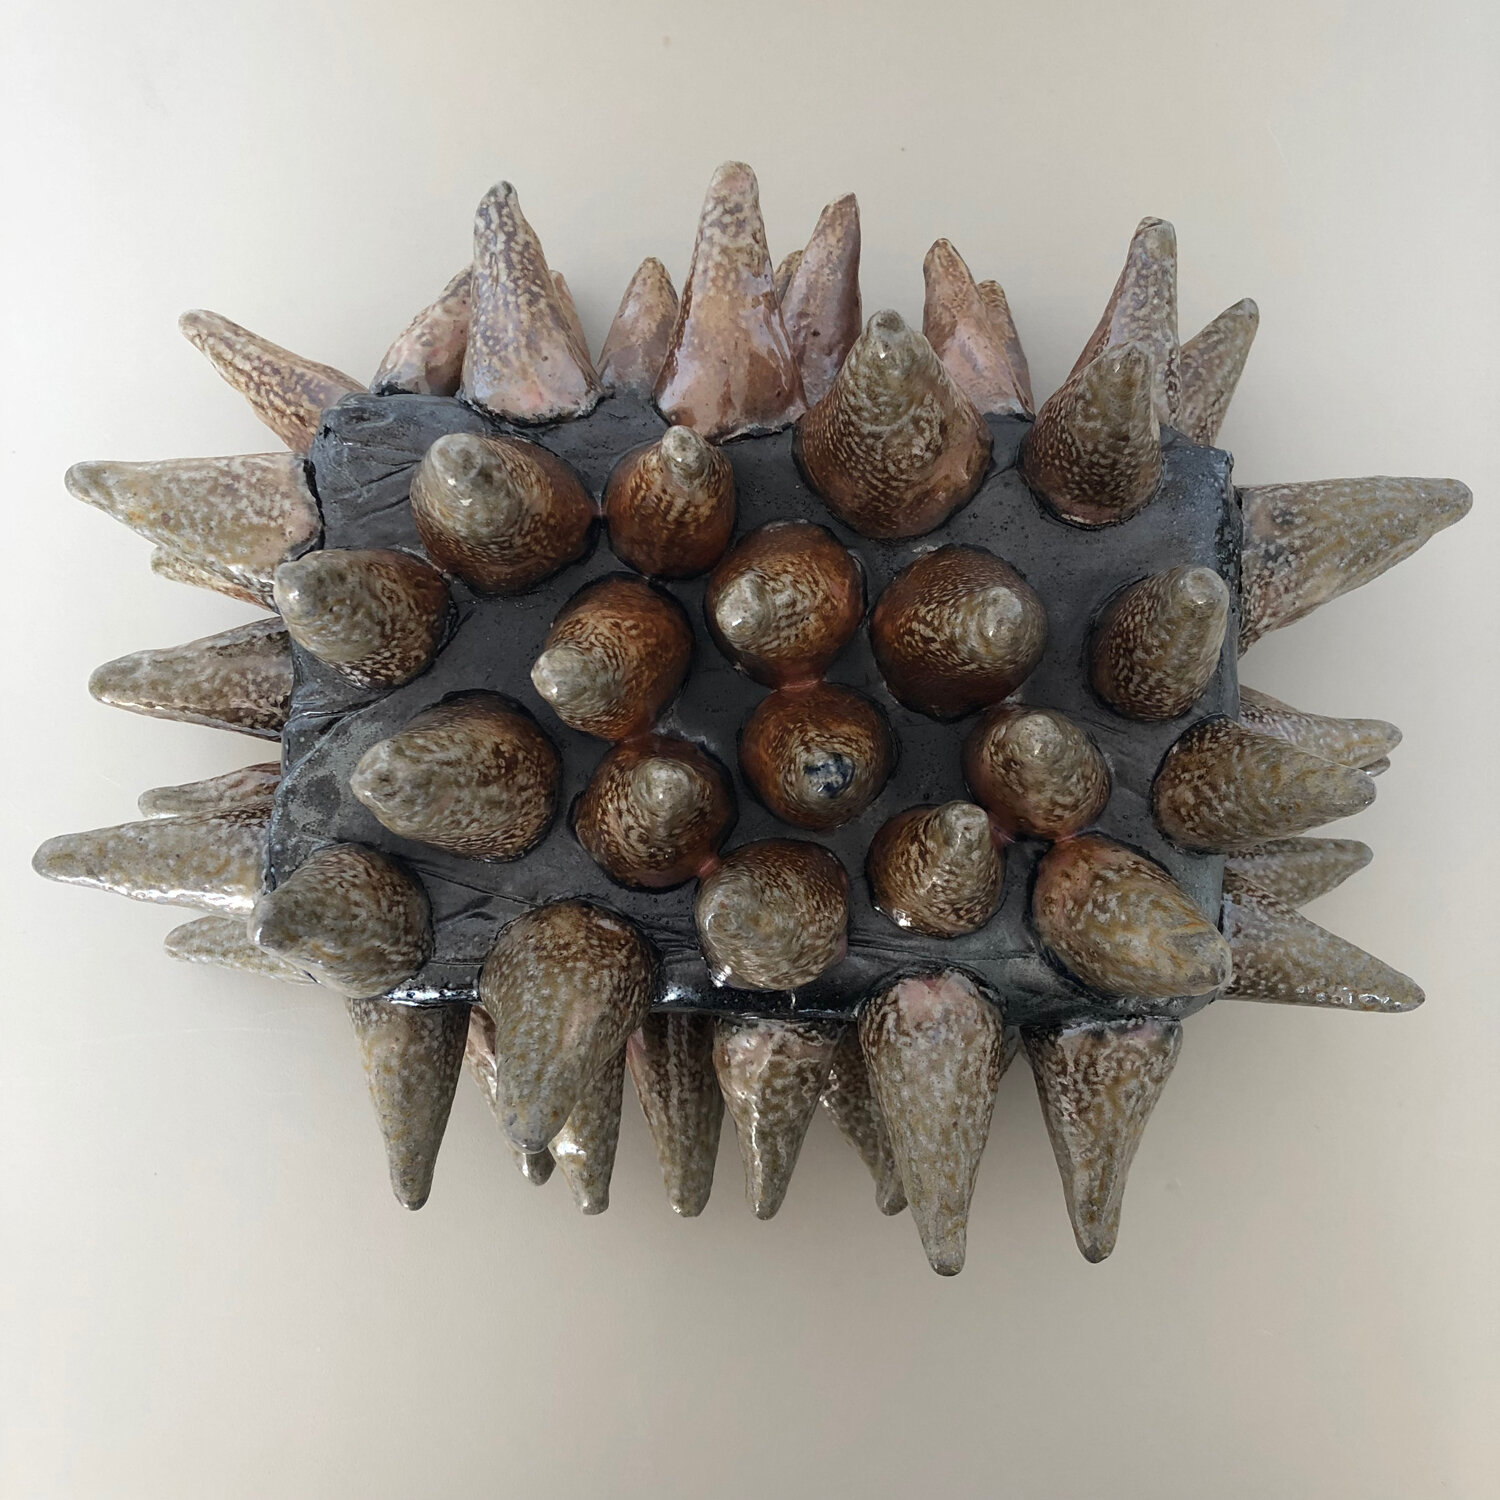 Funerary Box with Spikes, 2019, salt fired ceramic, 7 x 16 x 12"